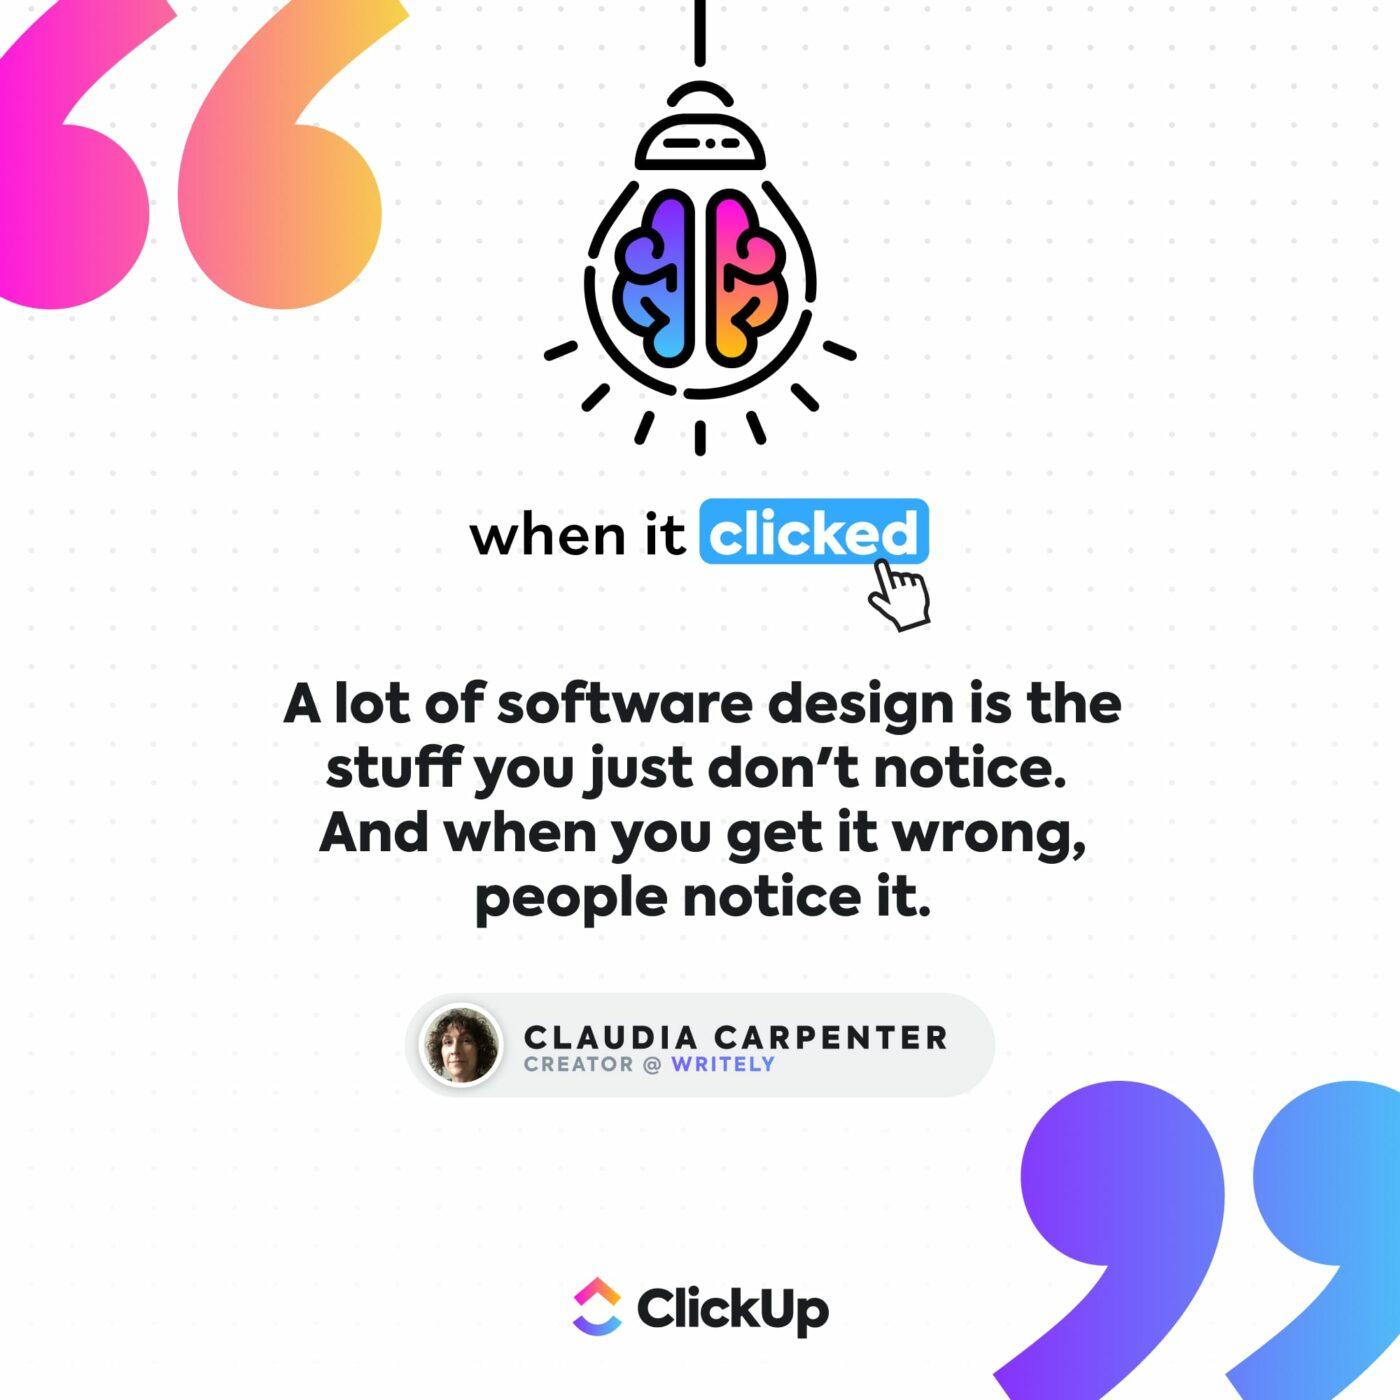 Claudia Carpenter of Writely on When It Clicked